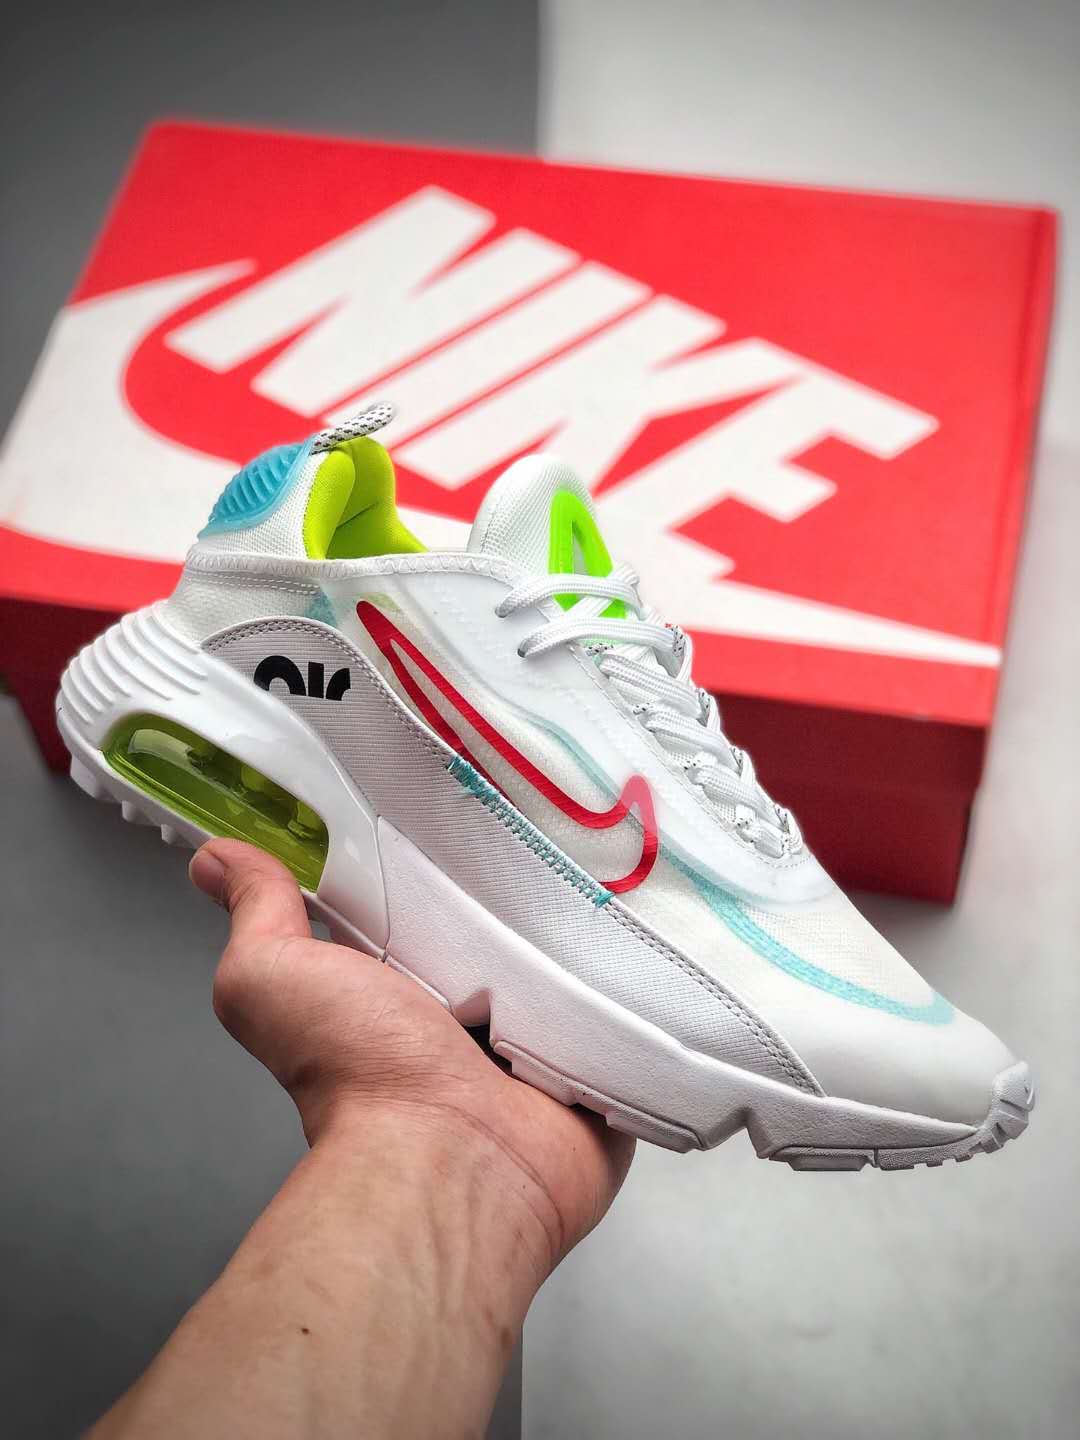 Nike Air Max 2090 White Red Green Blue Shoes CT7695-106 - Stylish and Iconic Footwear for Ultimate Comfort